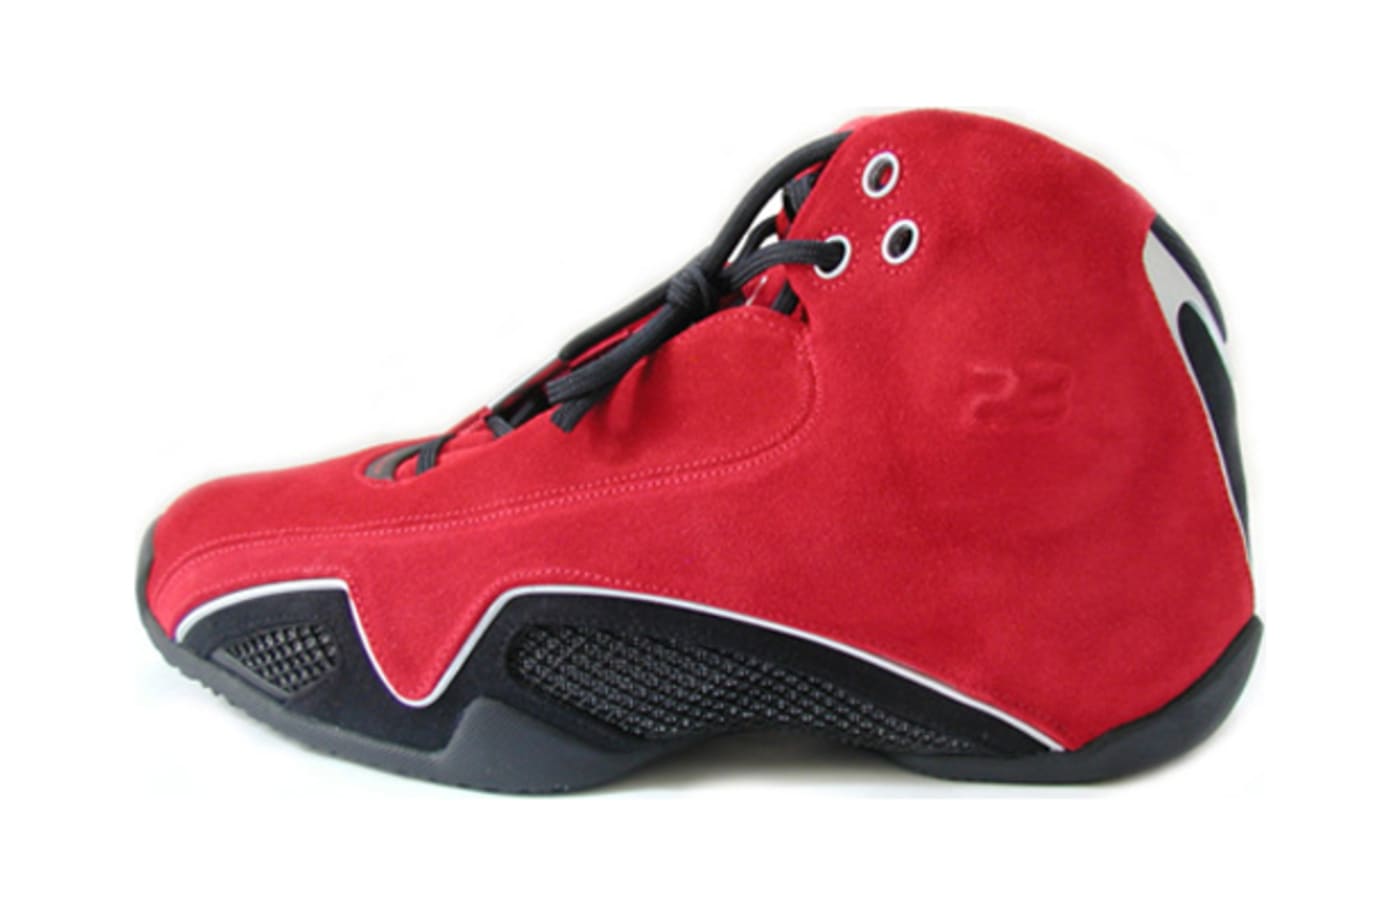 the best air jordans of all time